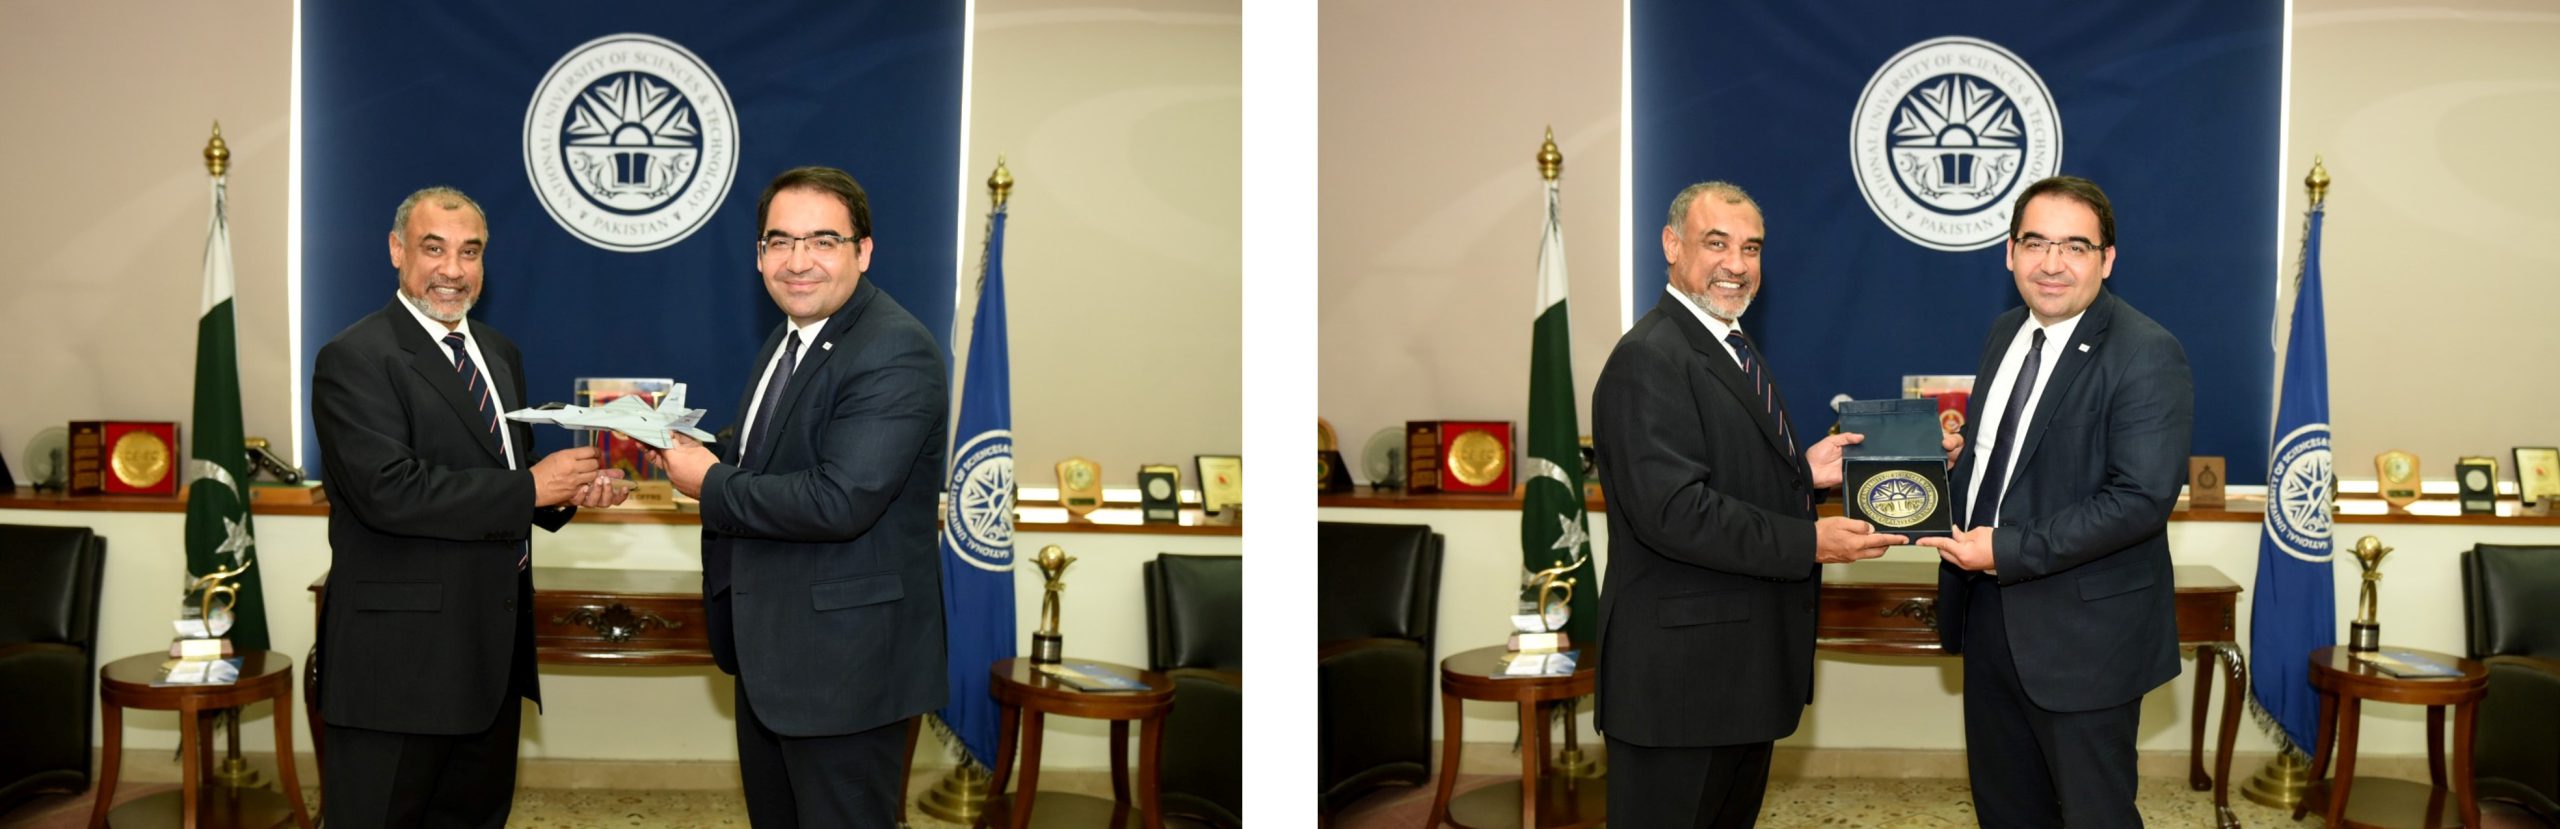 Figure 2. Rector NUST and Executive Vice President exchanging souvenir